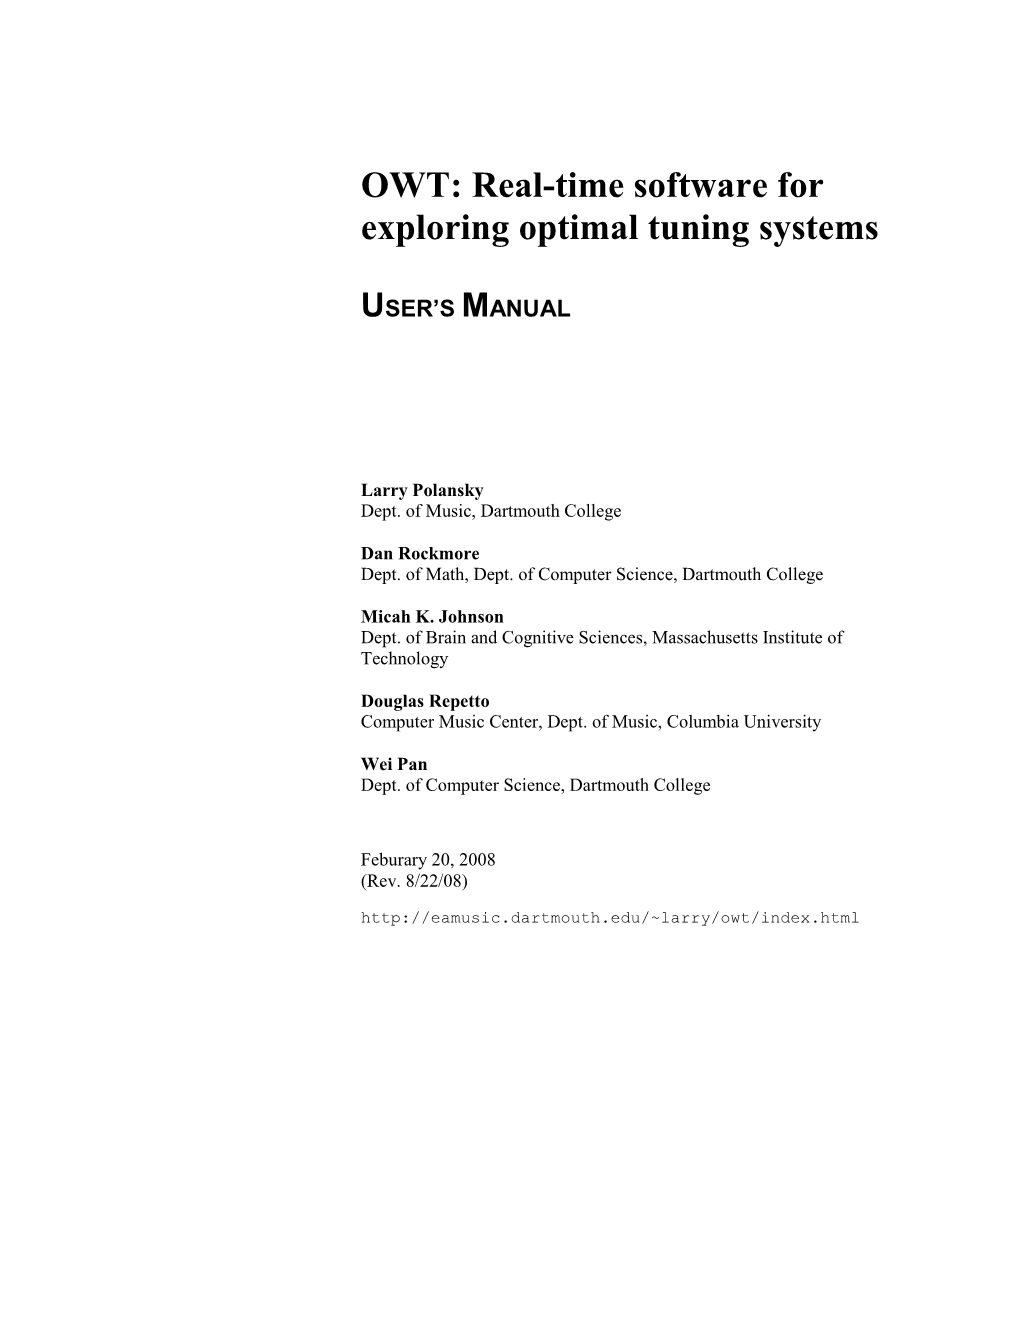 OWT: Real-Time Software for Exploring Optimal Tuning Systems